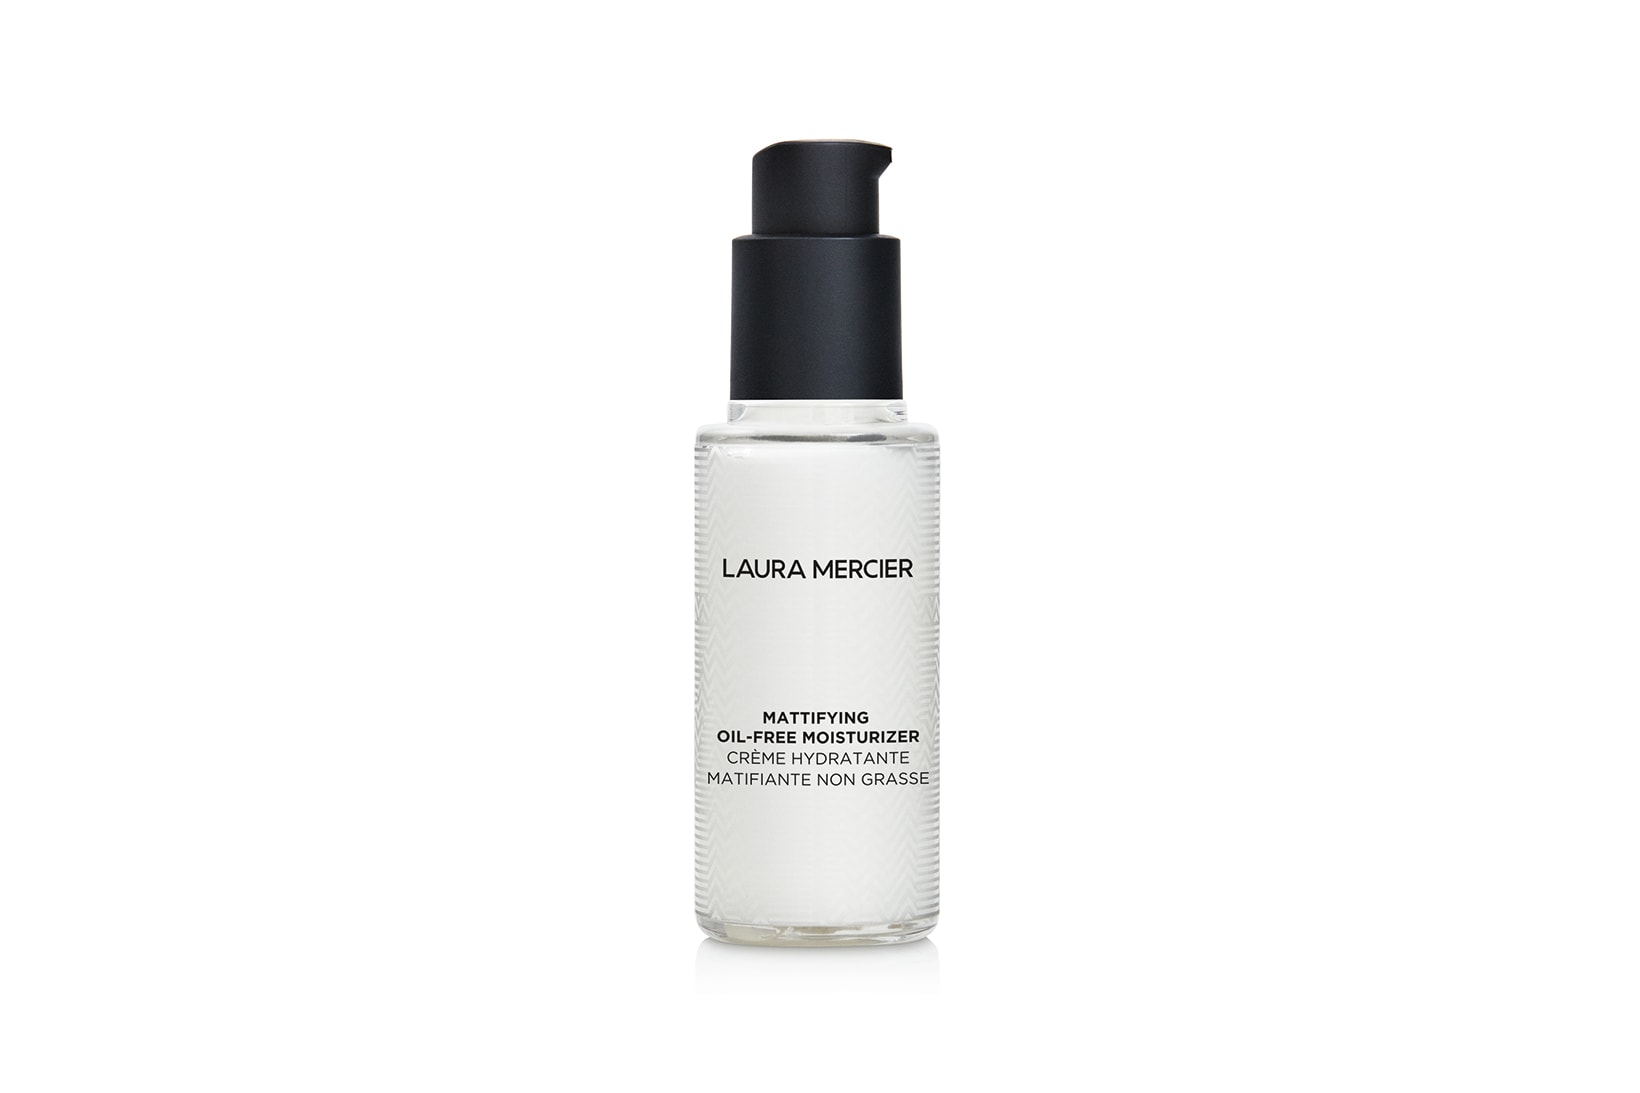 laura mercier skin essentials collection skincare balancing foaming cleanser lip balm soothing eye makeup remover illuminating eye cream